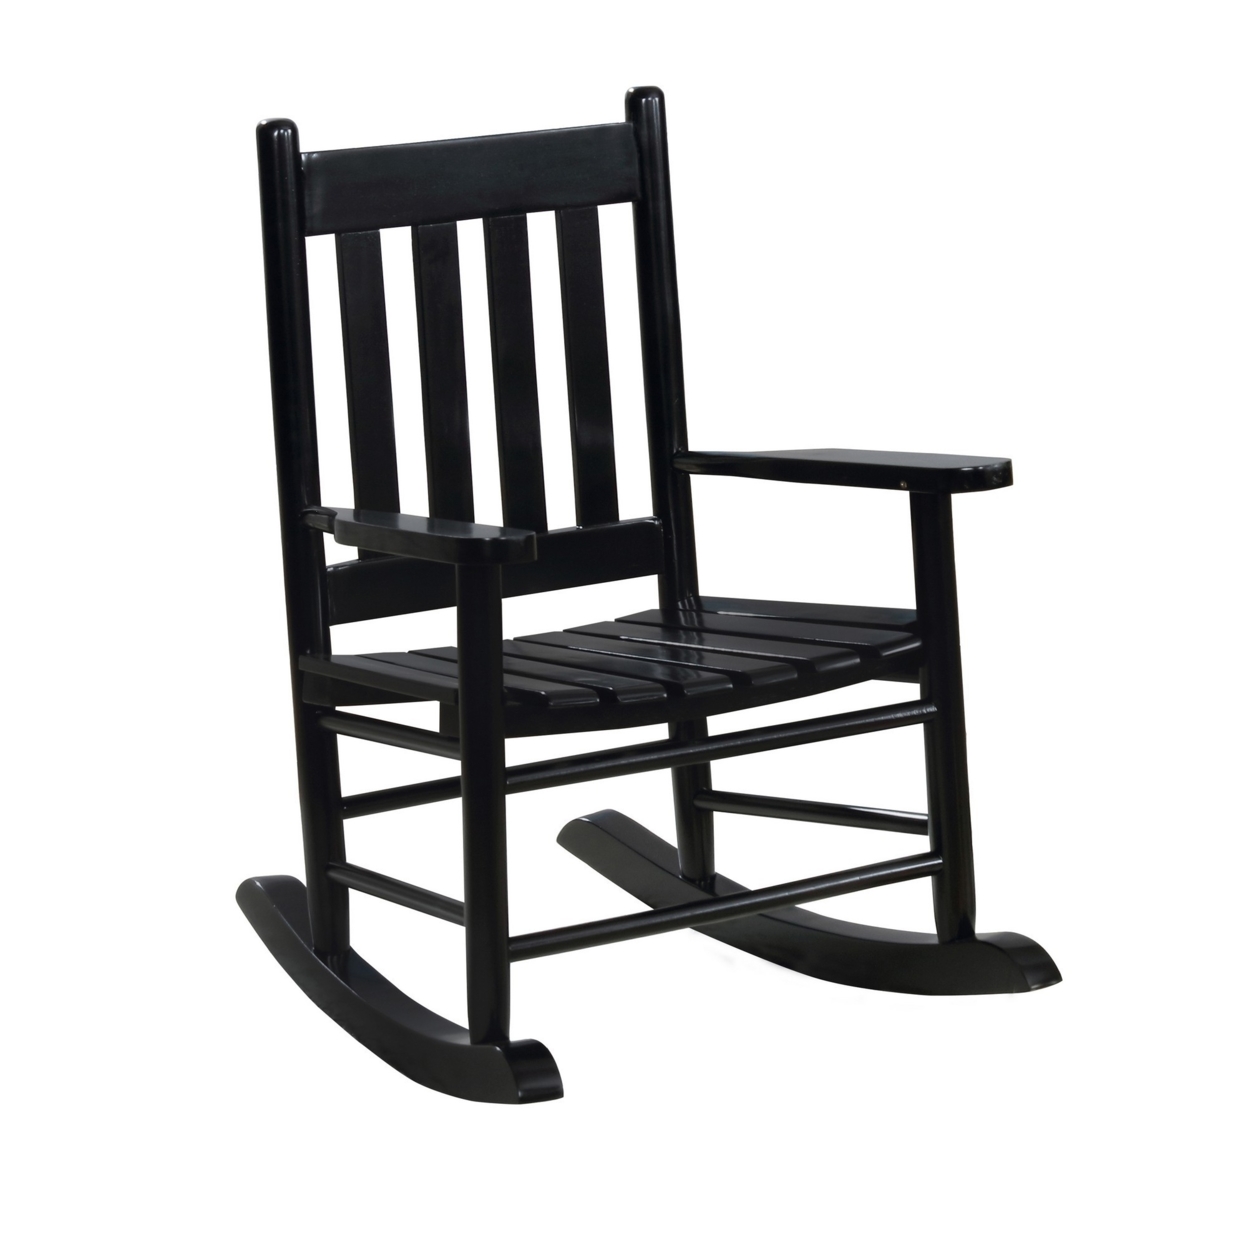 Youth Rocking Chair With Slatted Design Back And Seat, Black- Saltoro Sherpi